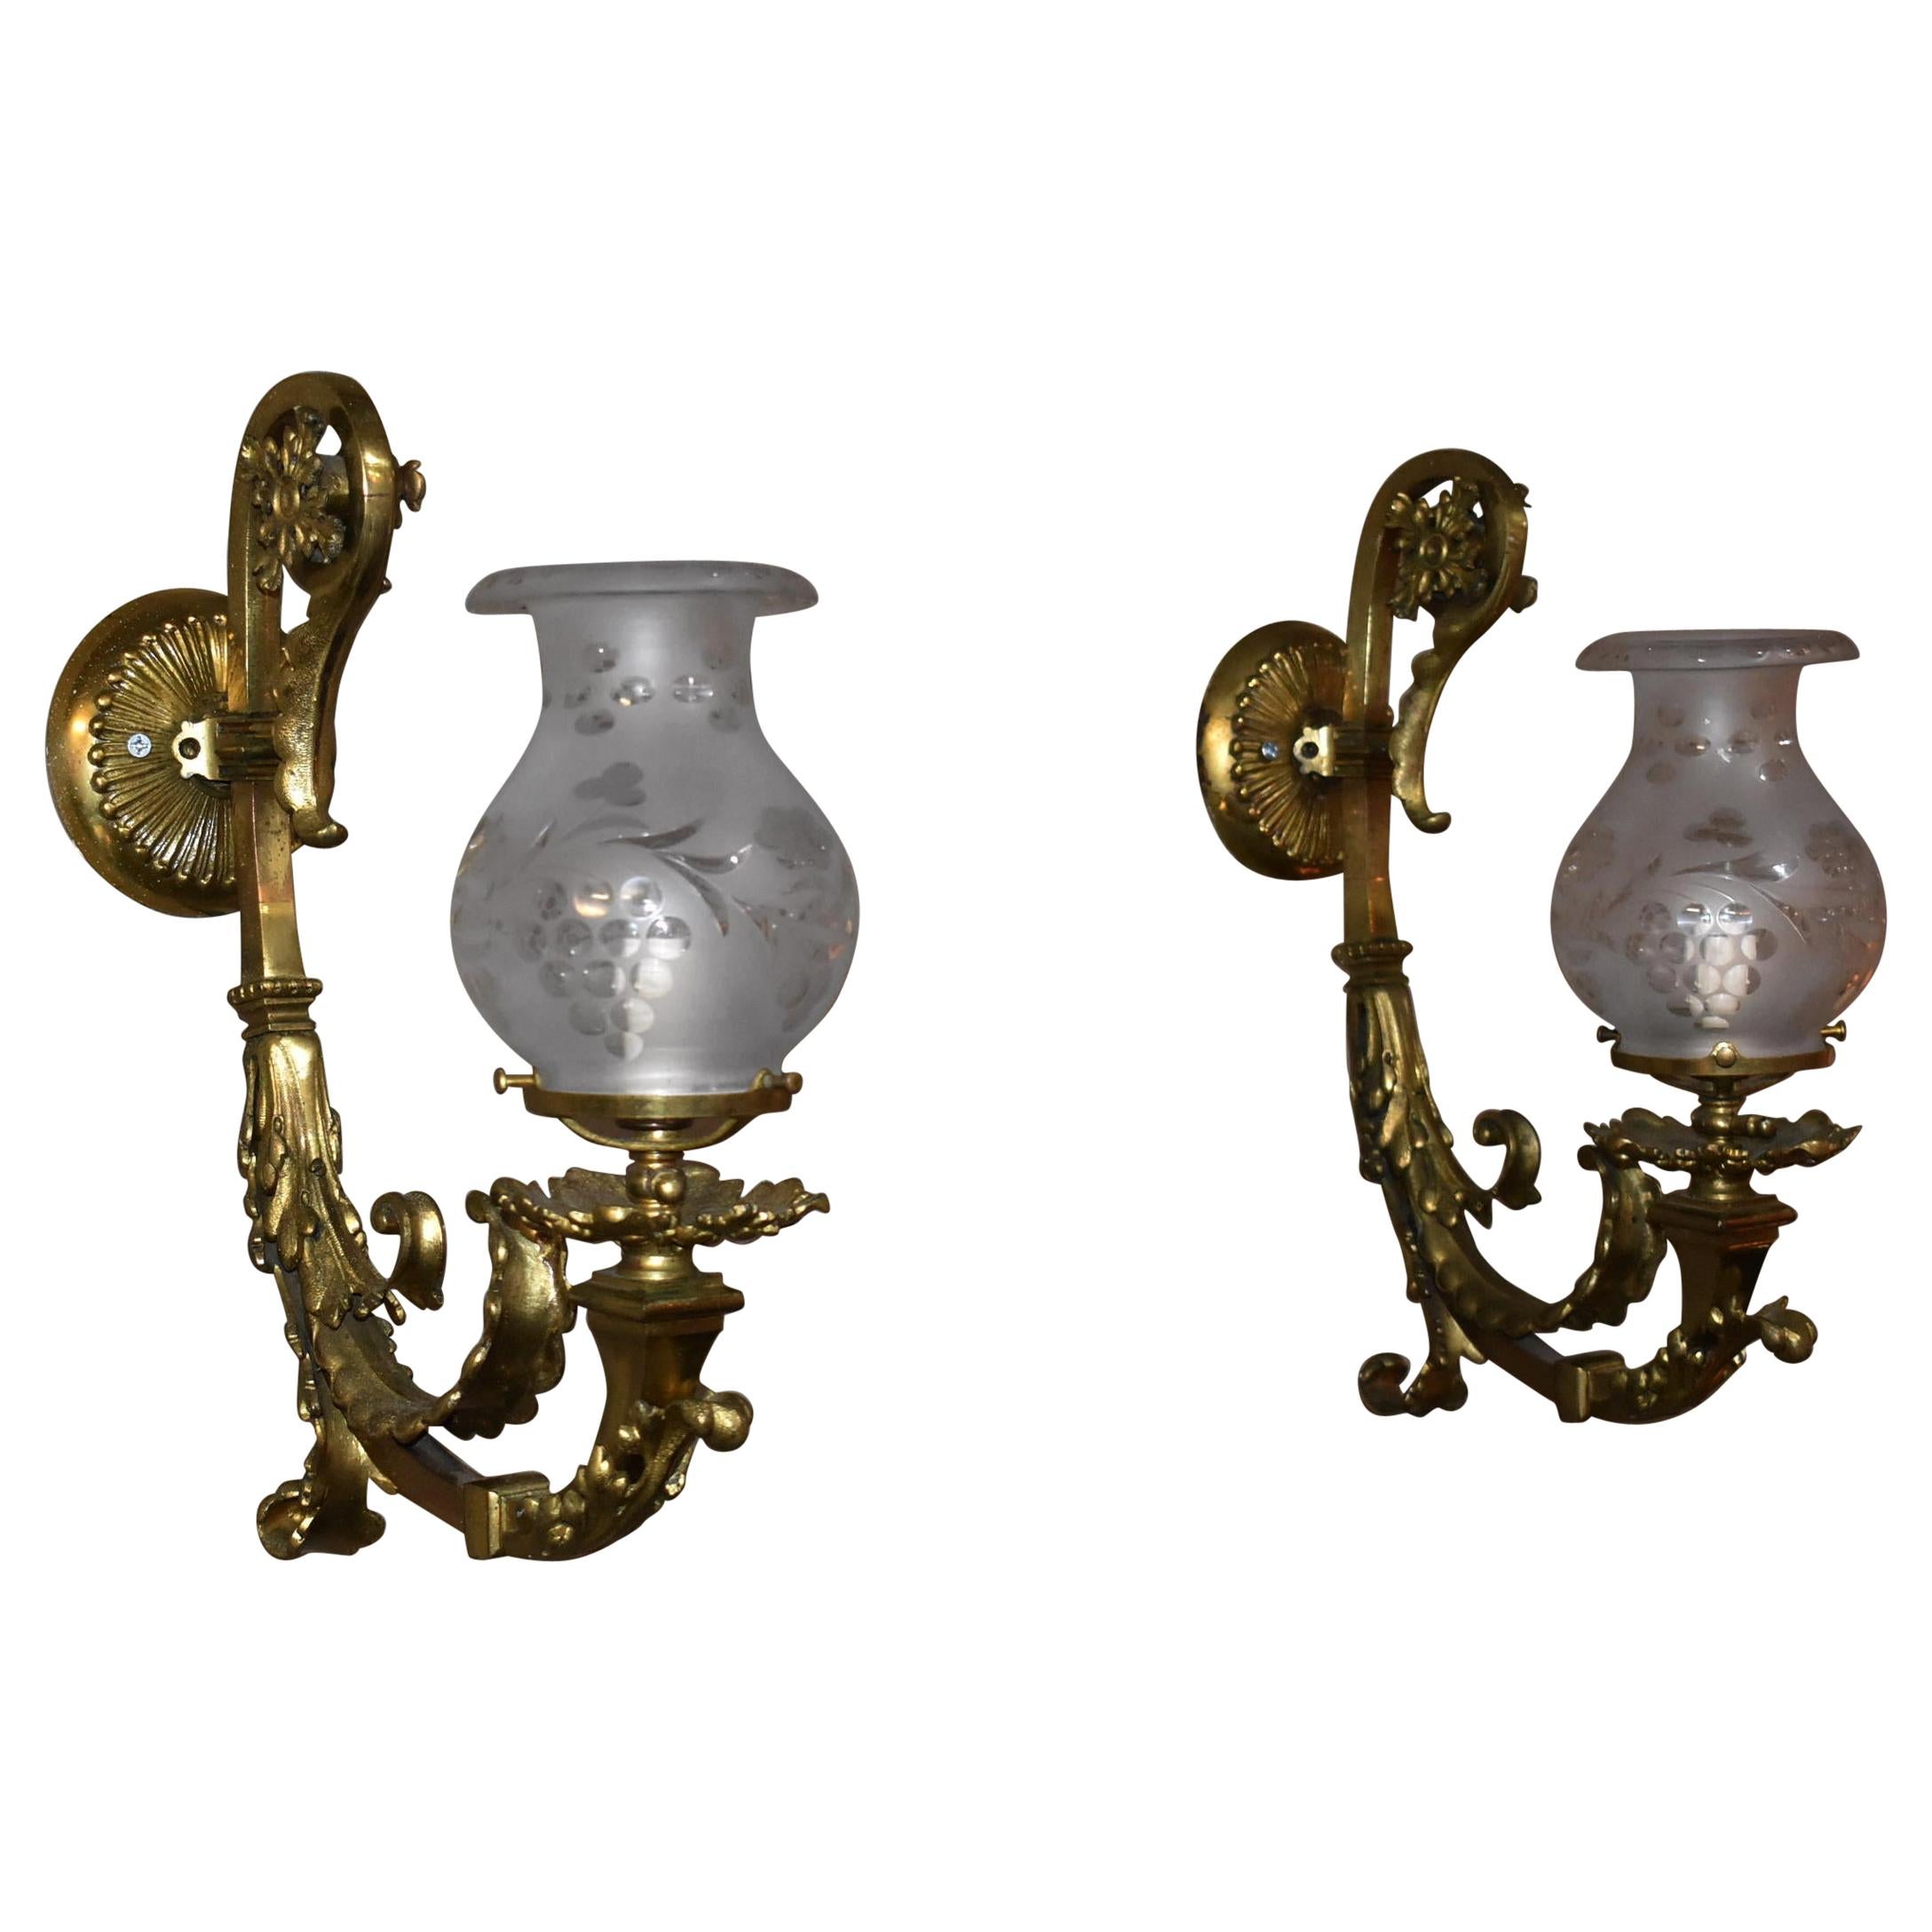 Pair of Antique Brass Ornate Wall Sconces Astral Cut and Polished Glass Shades	